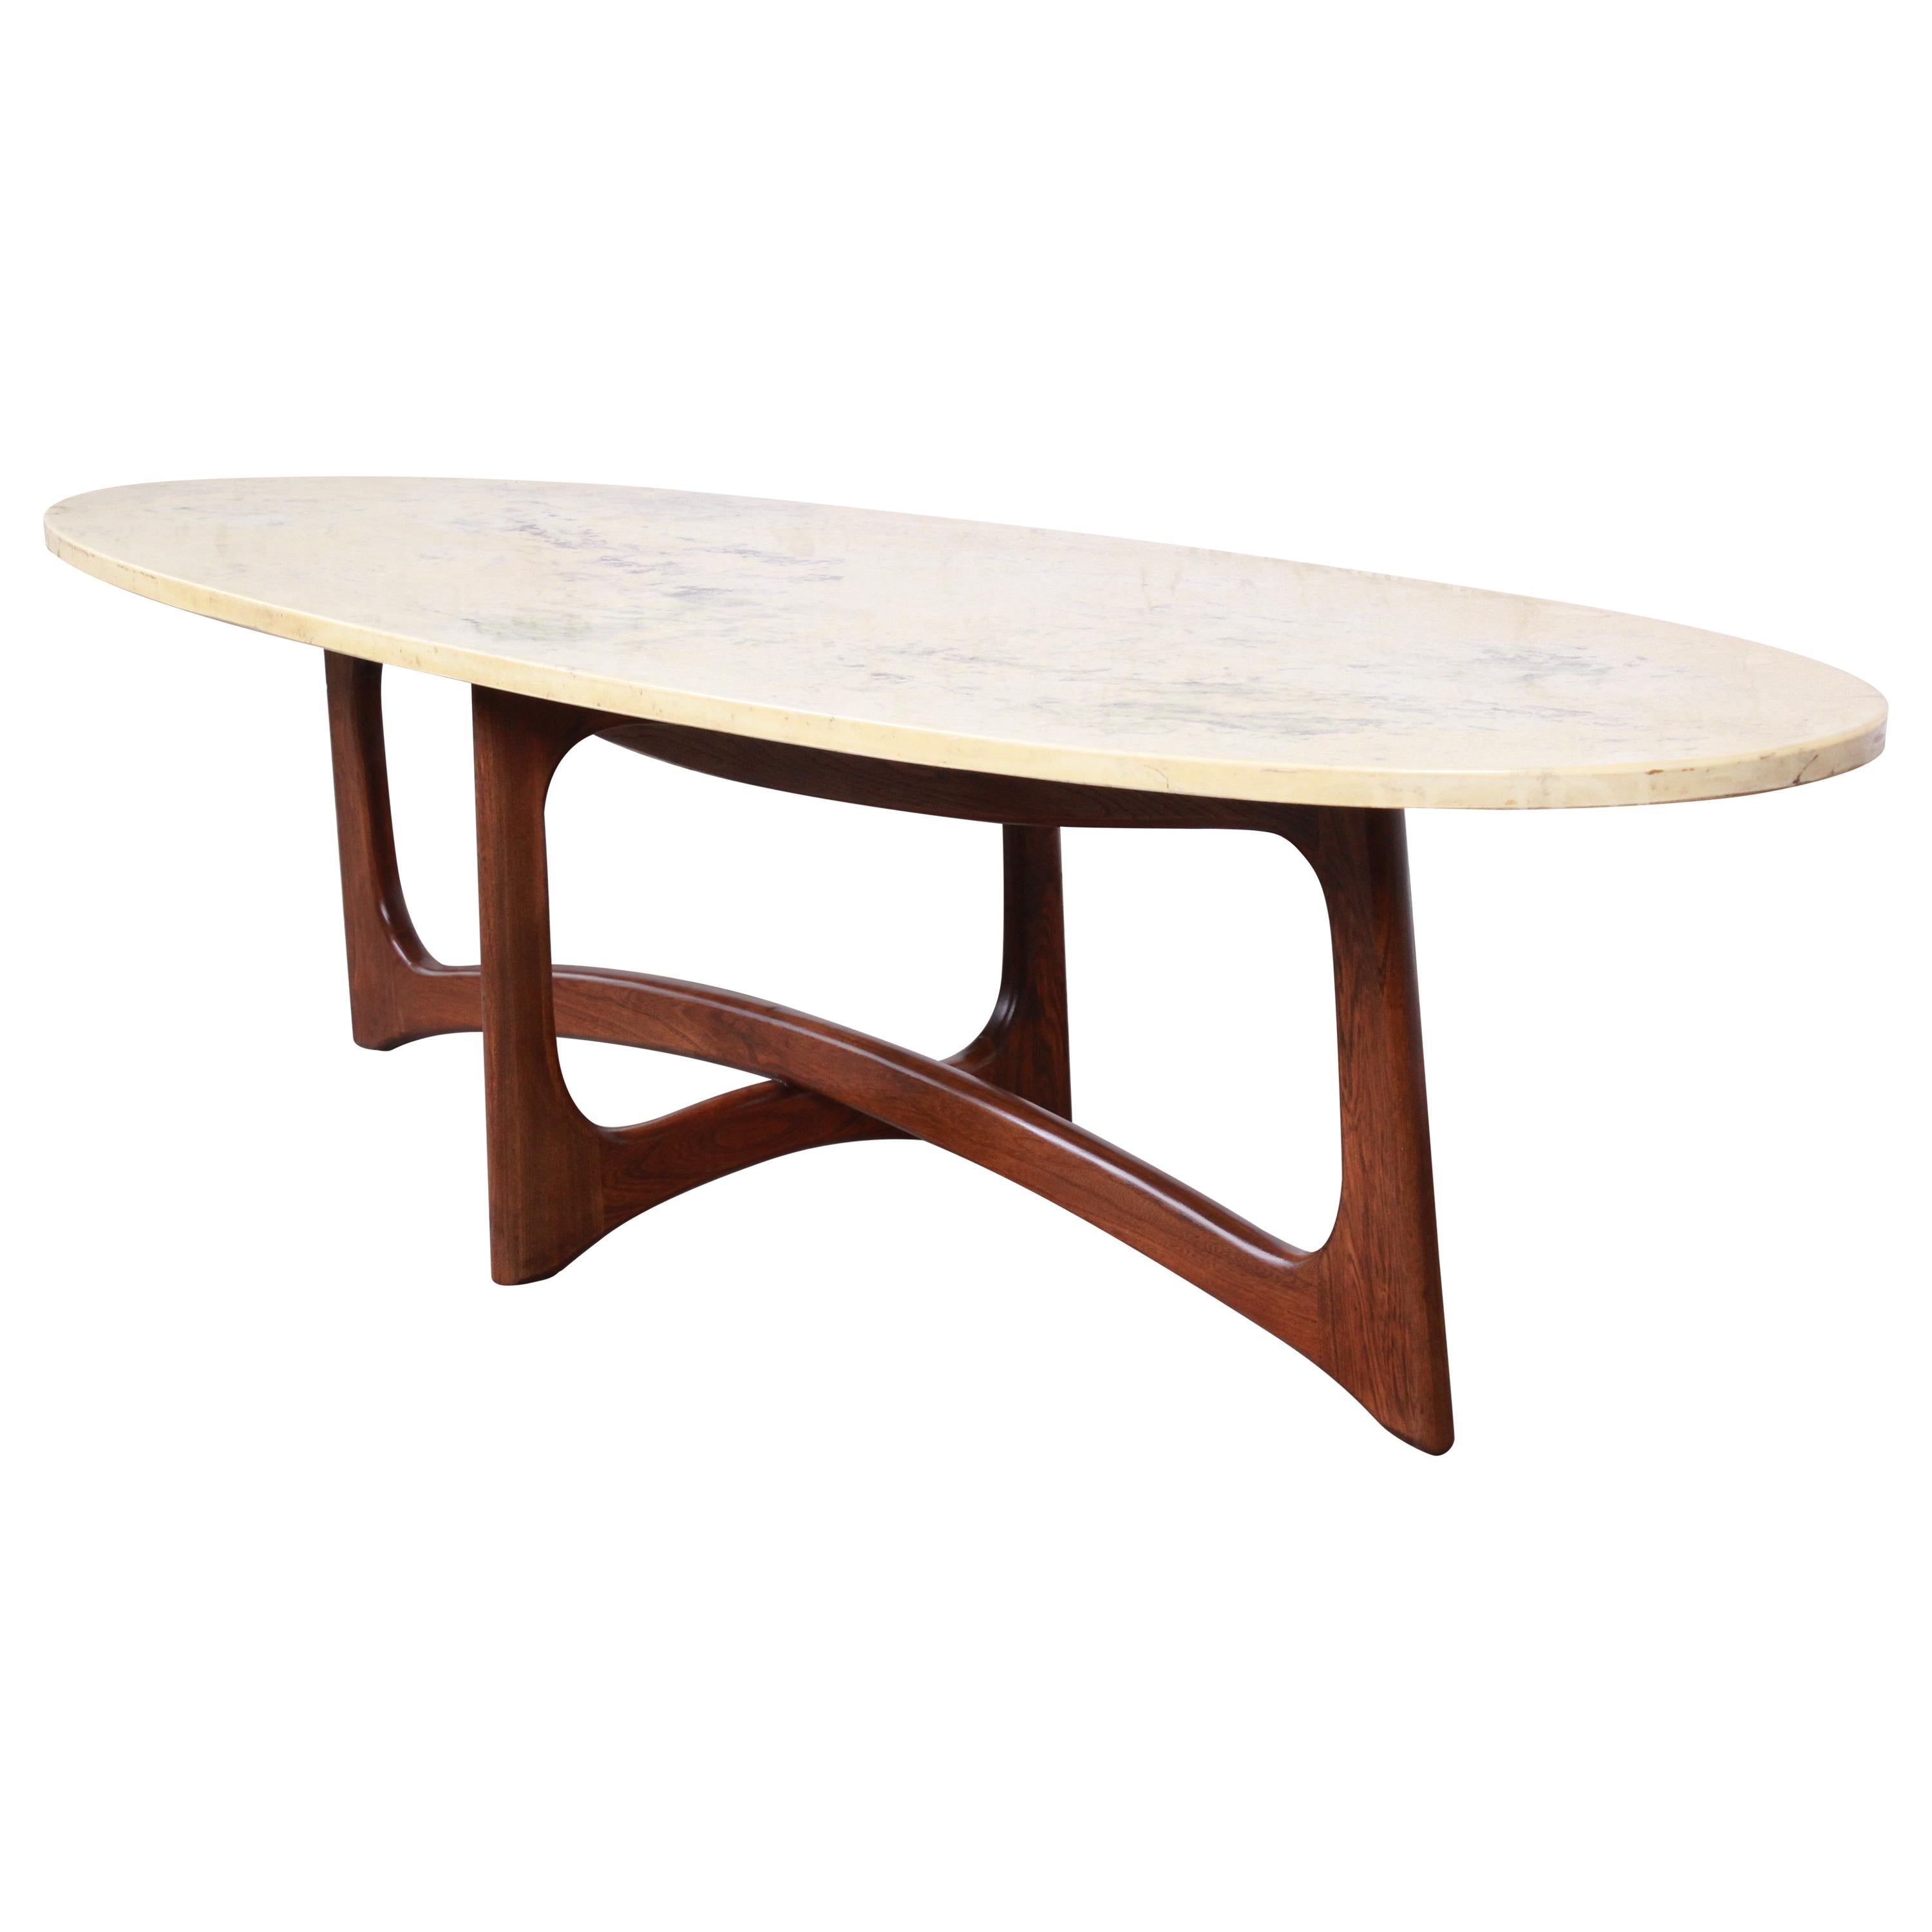 Adrian Pearsall Sculpted Walnut Marble Top Surfboard Coffee Table, 1960s